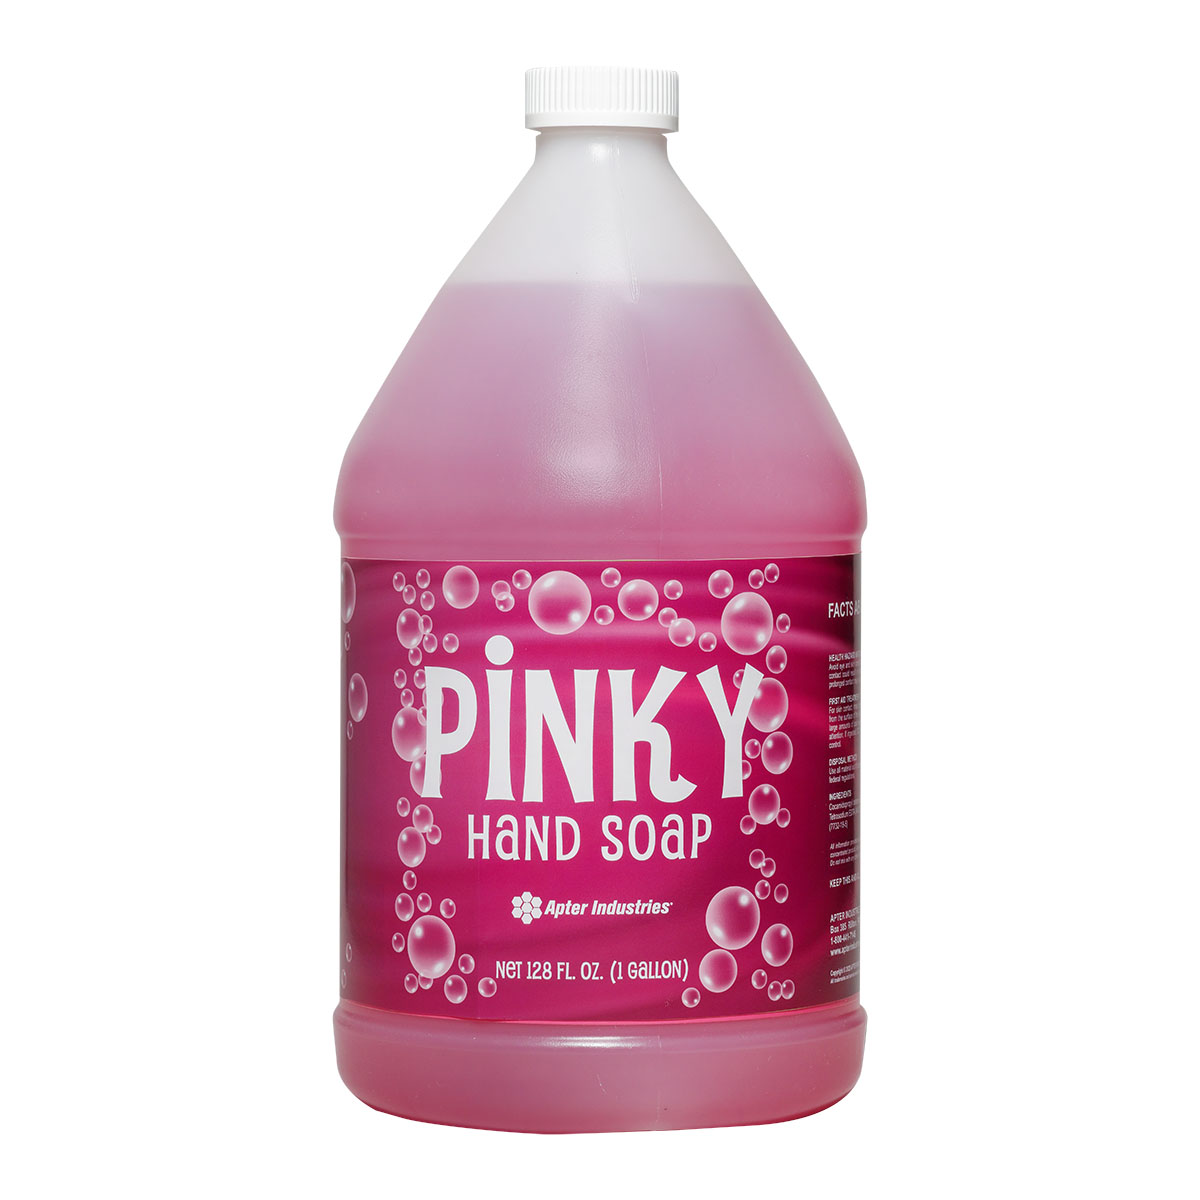 Pinky Hand Soap